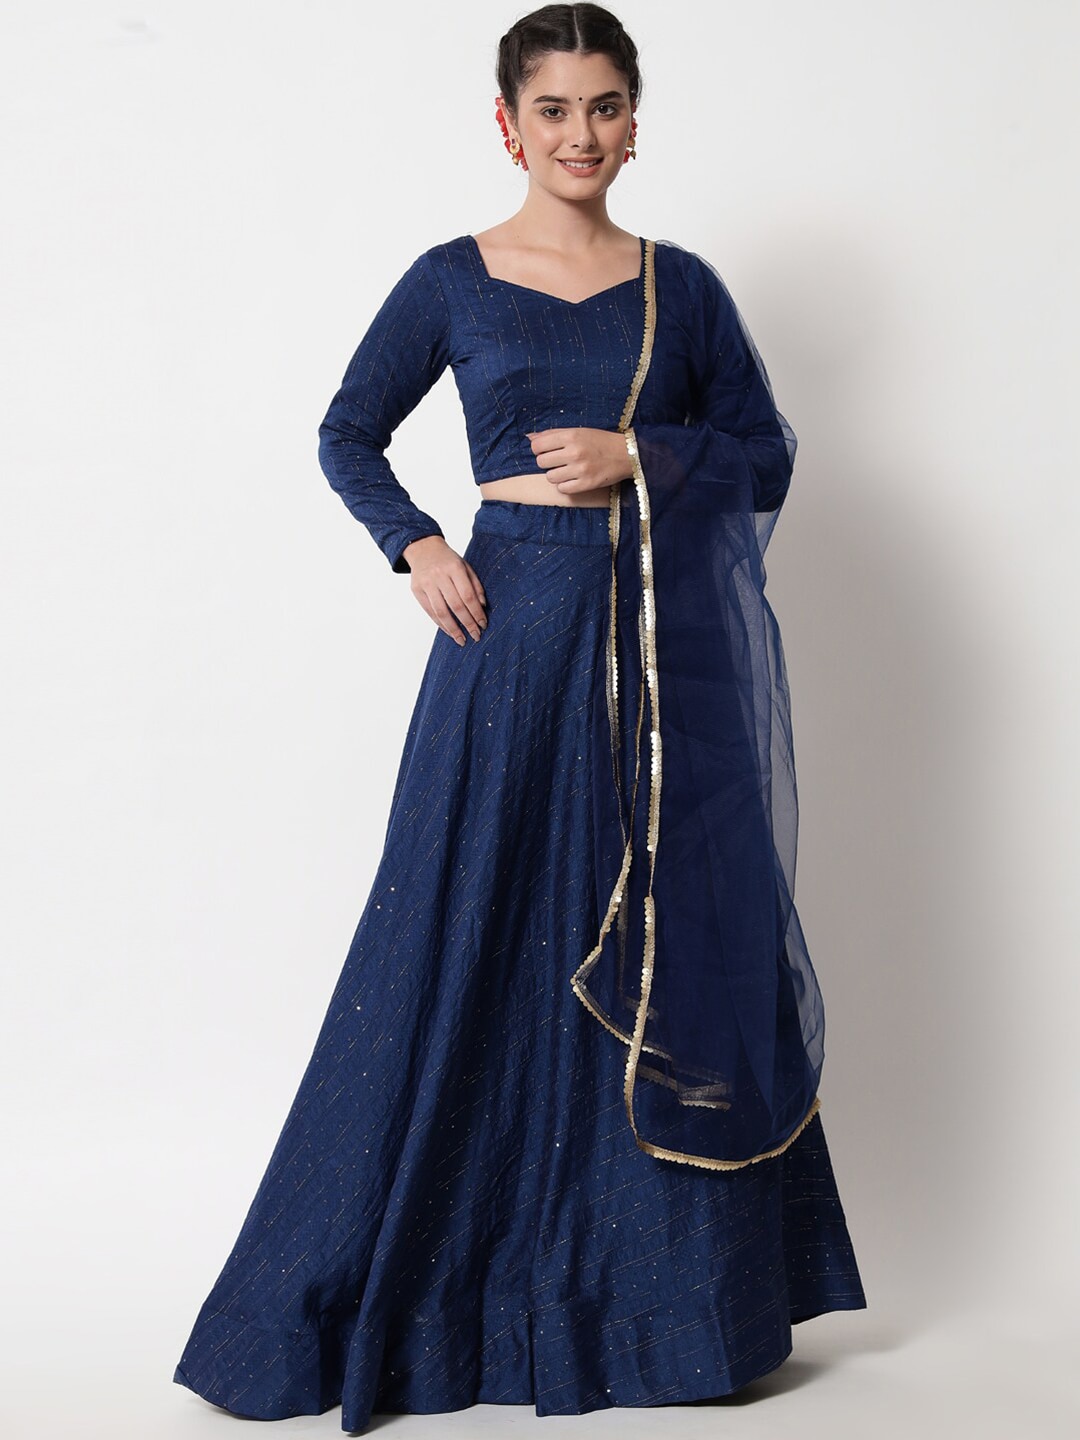 DIVASTRI Navy Blue & Gold-Toned Embroidered Semi-Stitched Lehenga & Unstitched Blouse With Dupatta Price in India